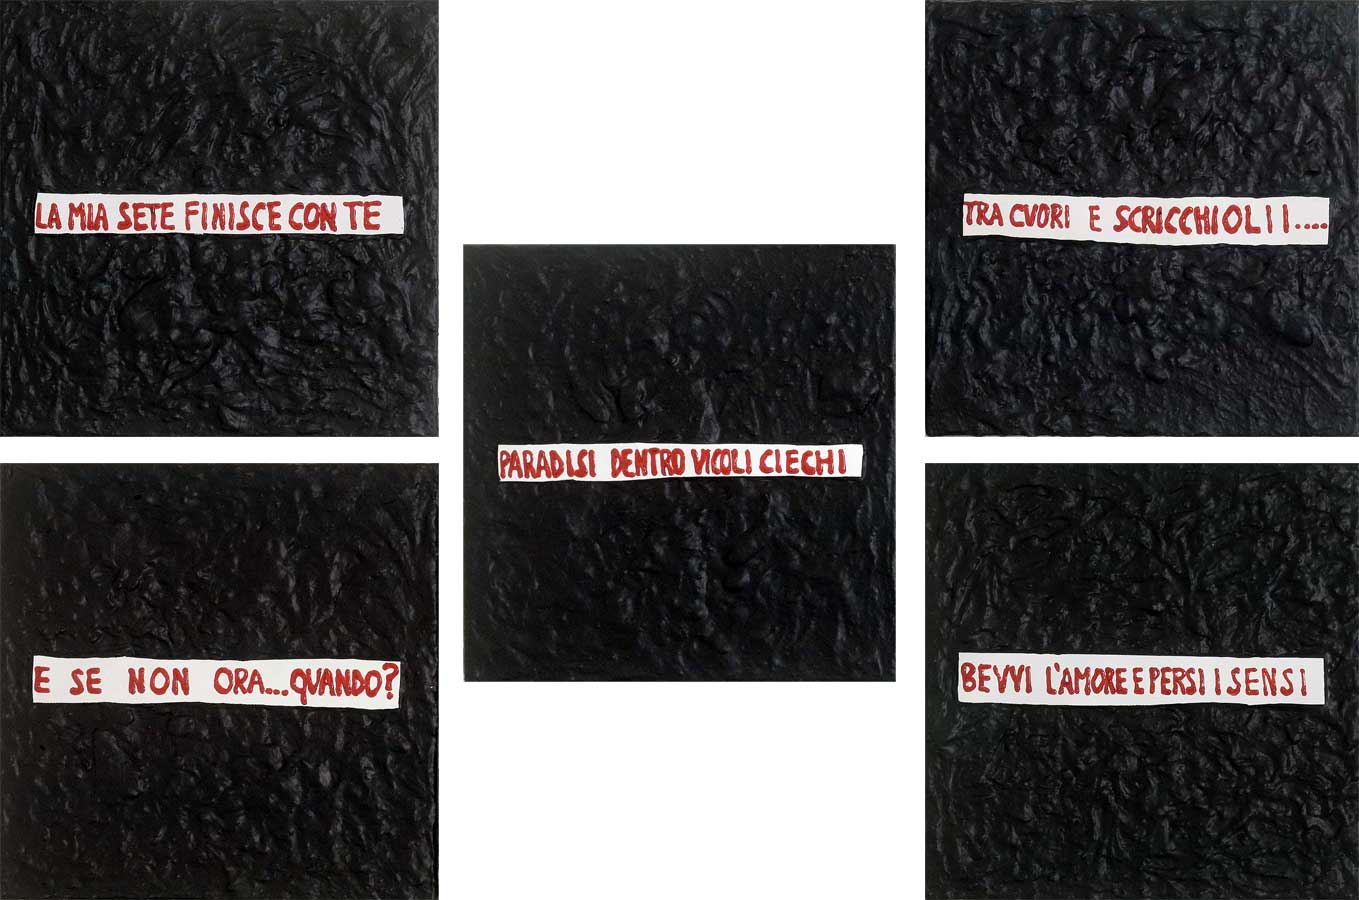 Poesie nere in 5, painting by Nicola Guerraz, acrylic and vulcanized rubber on canvas, 160 x 160 cm, 2008, total